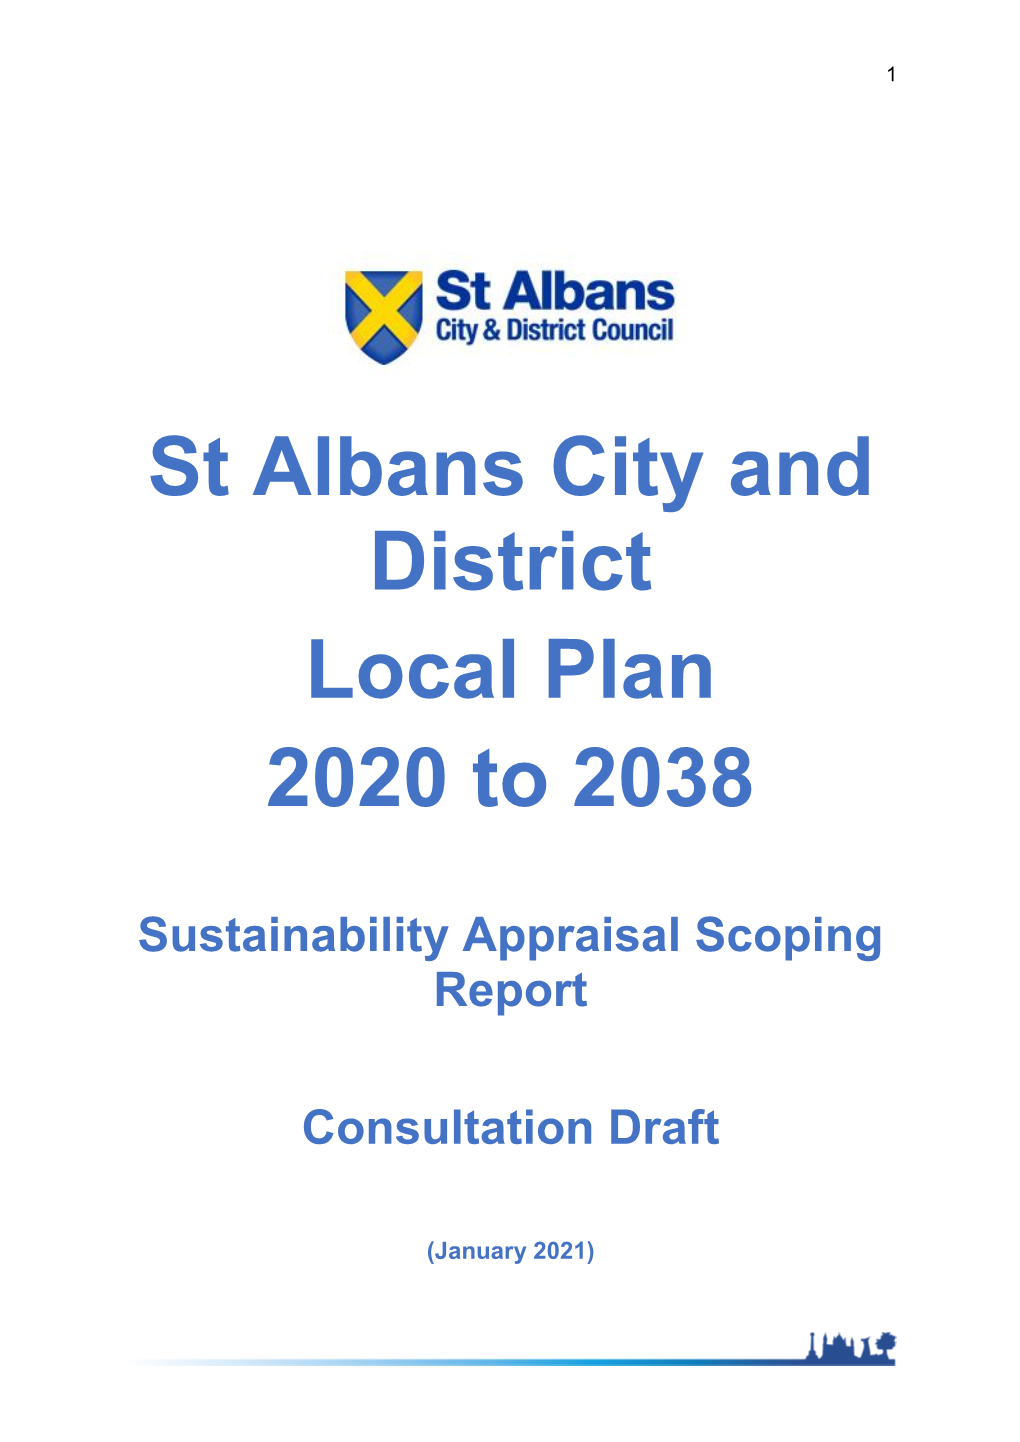 St Albans City and District Local Plan 2020 to 2038